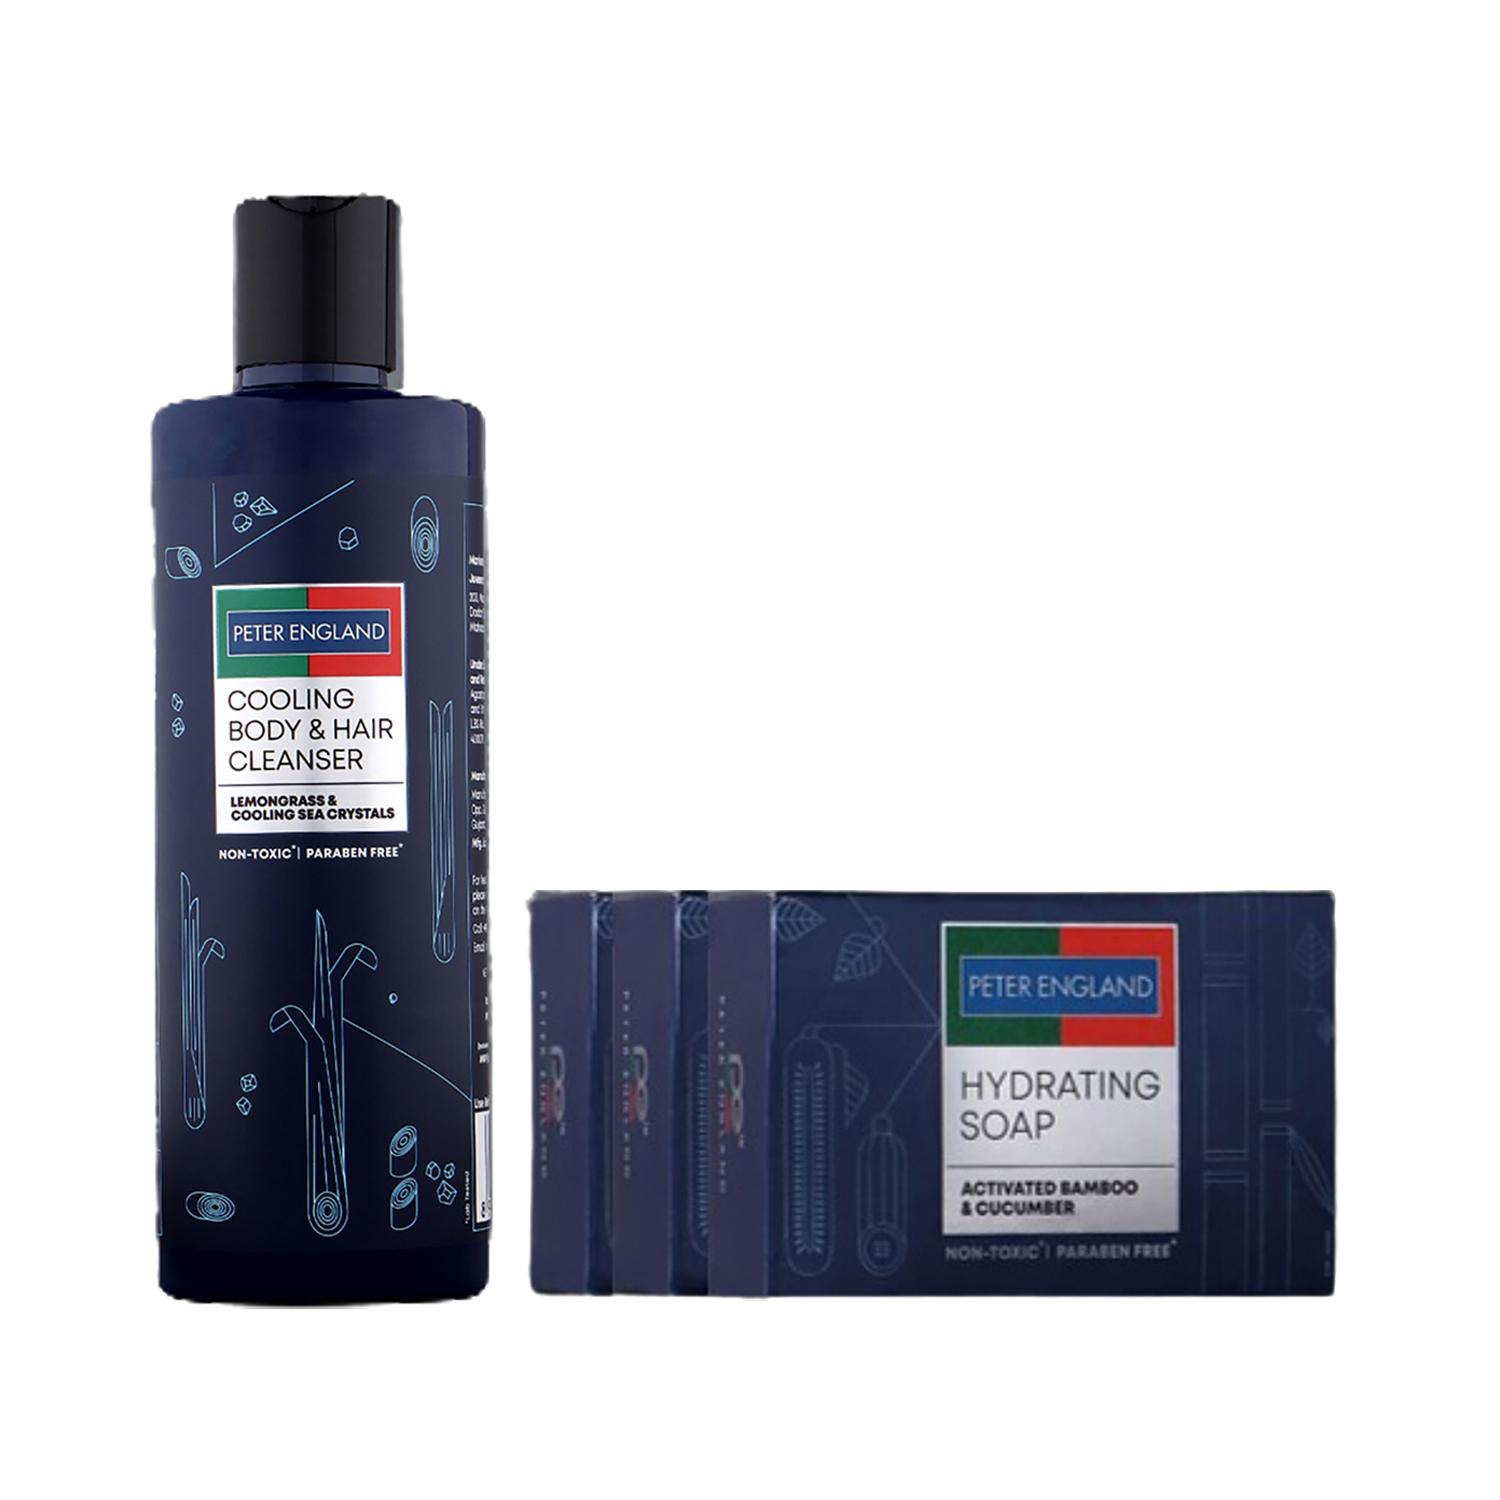 Peter England Cooling Body & Hair Cleanser (250 ml), Hydrating Soap (100 g) Combo